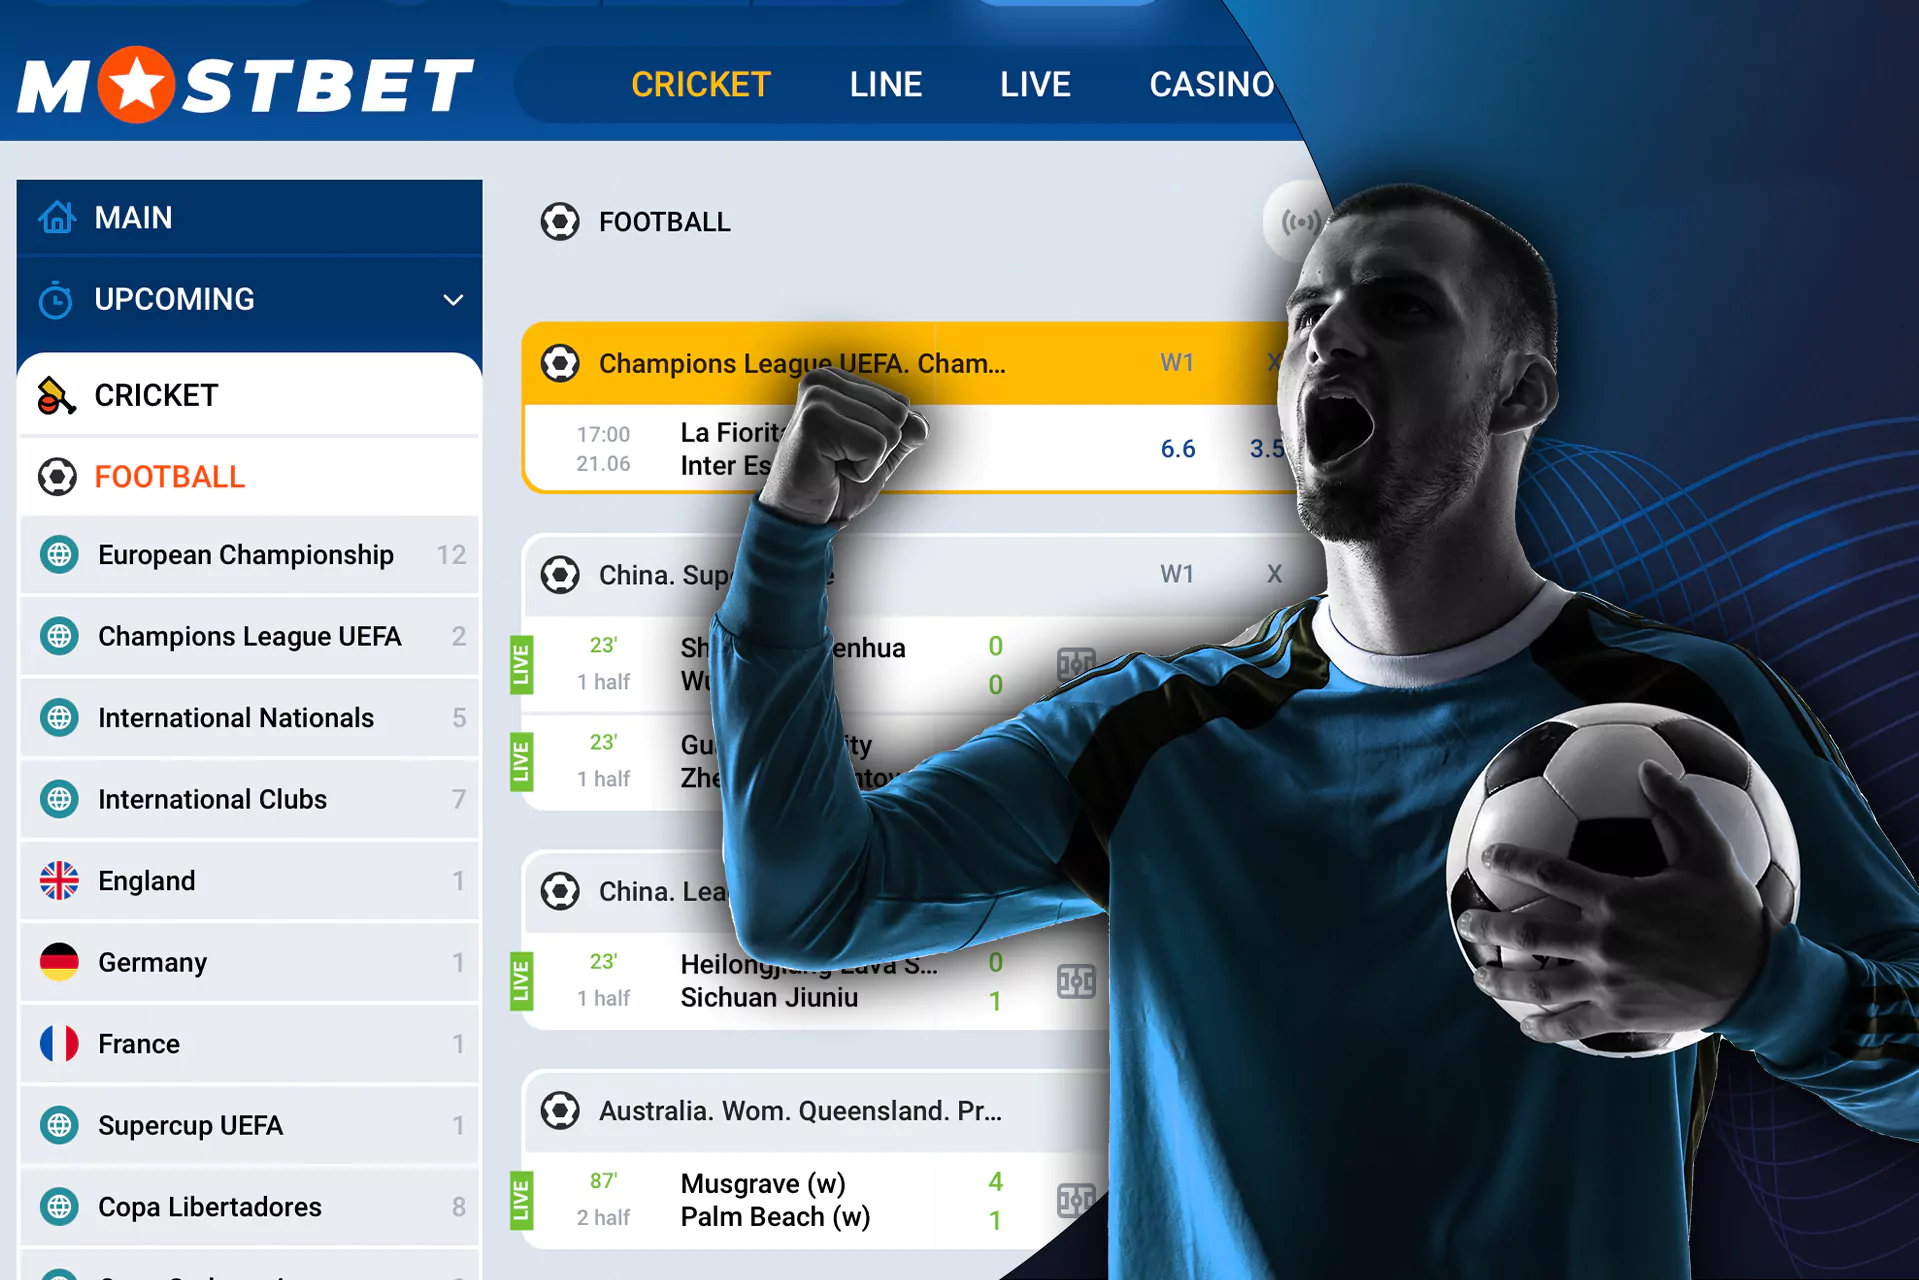 Football betting at Mostbet: championships and leagues.